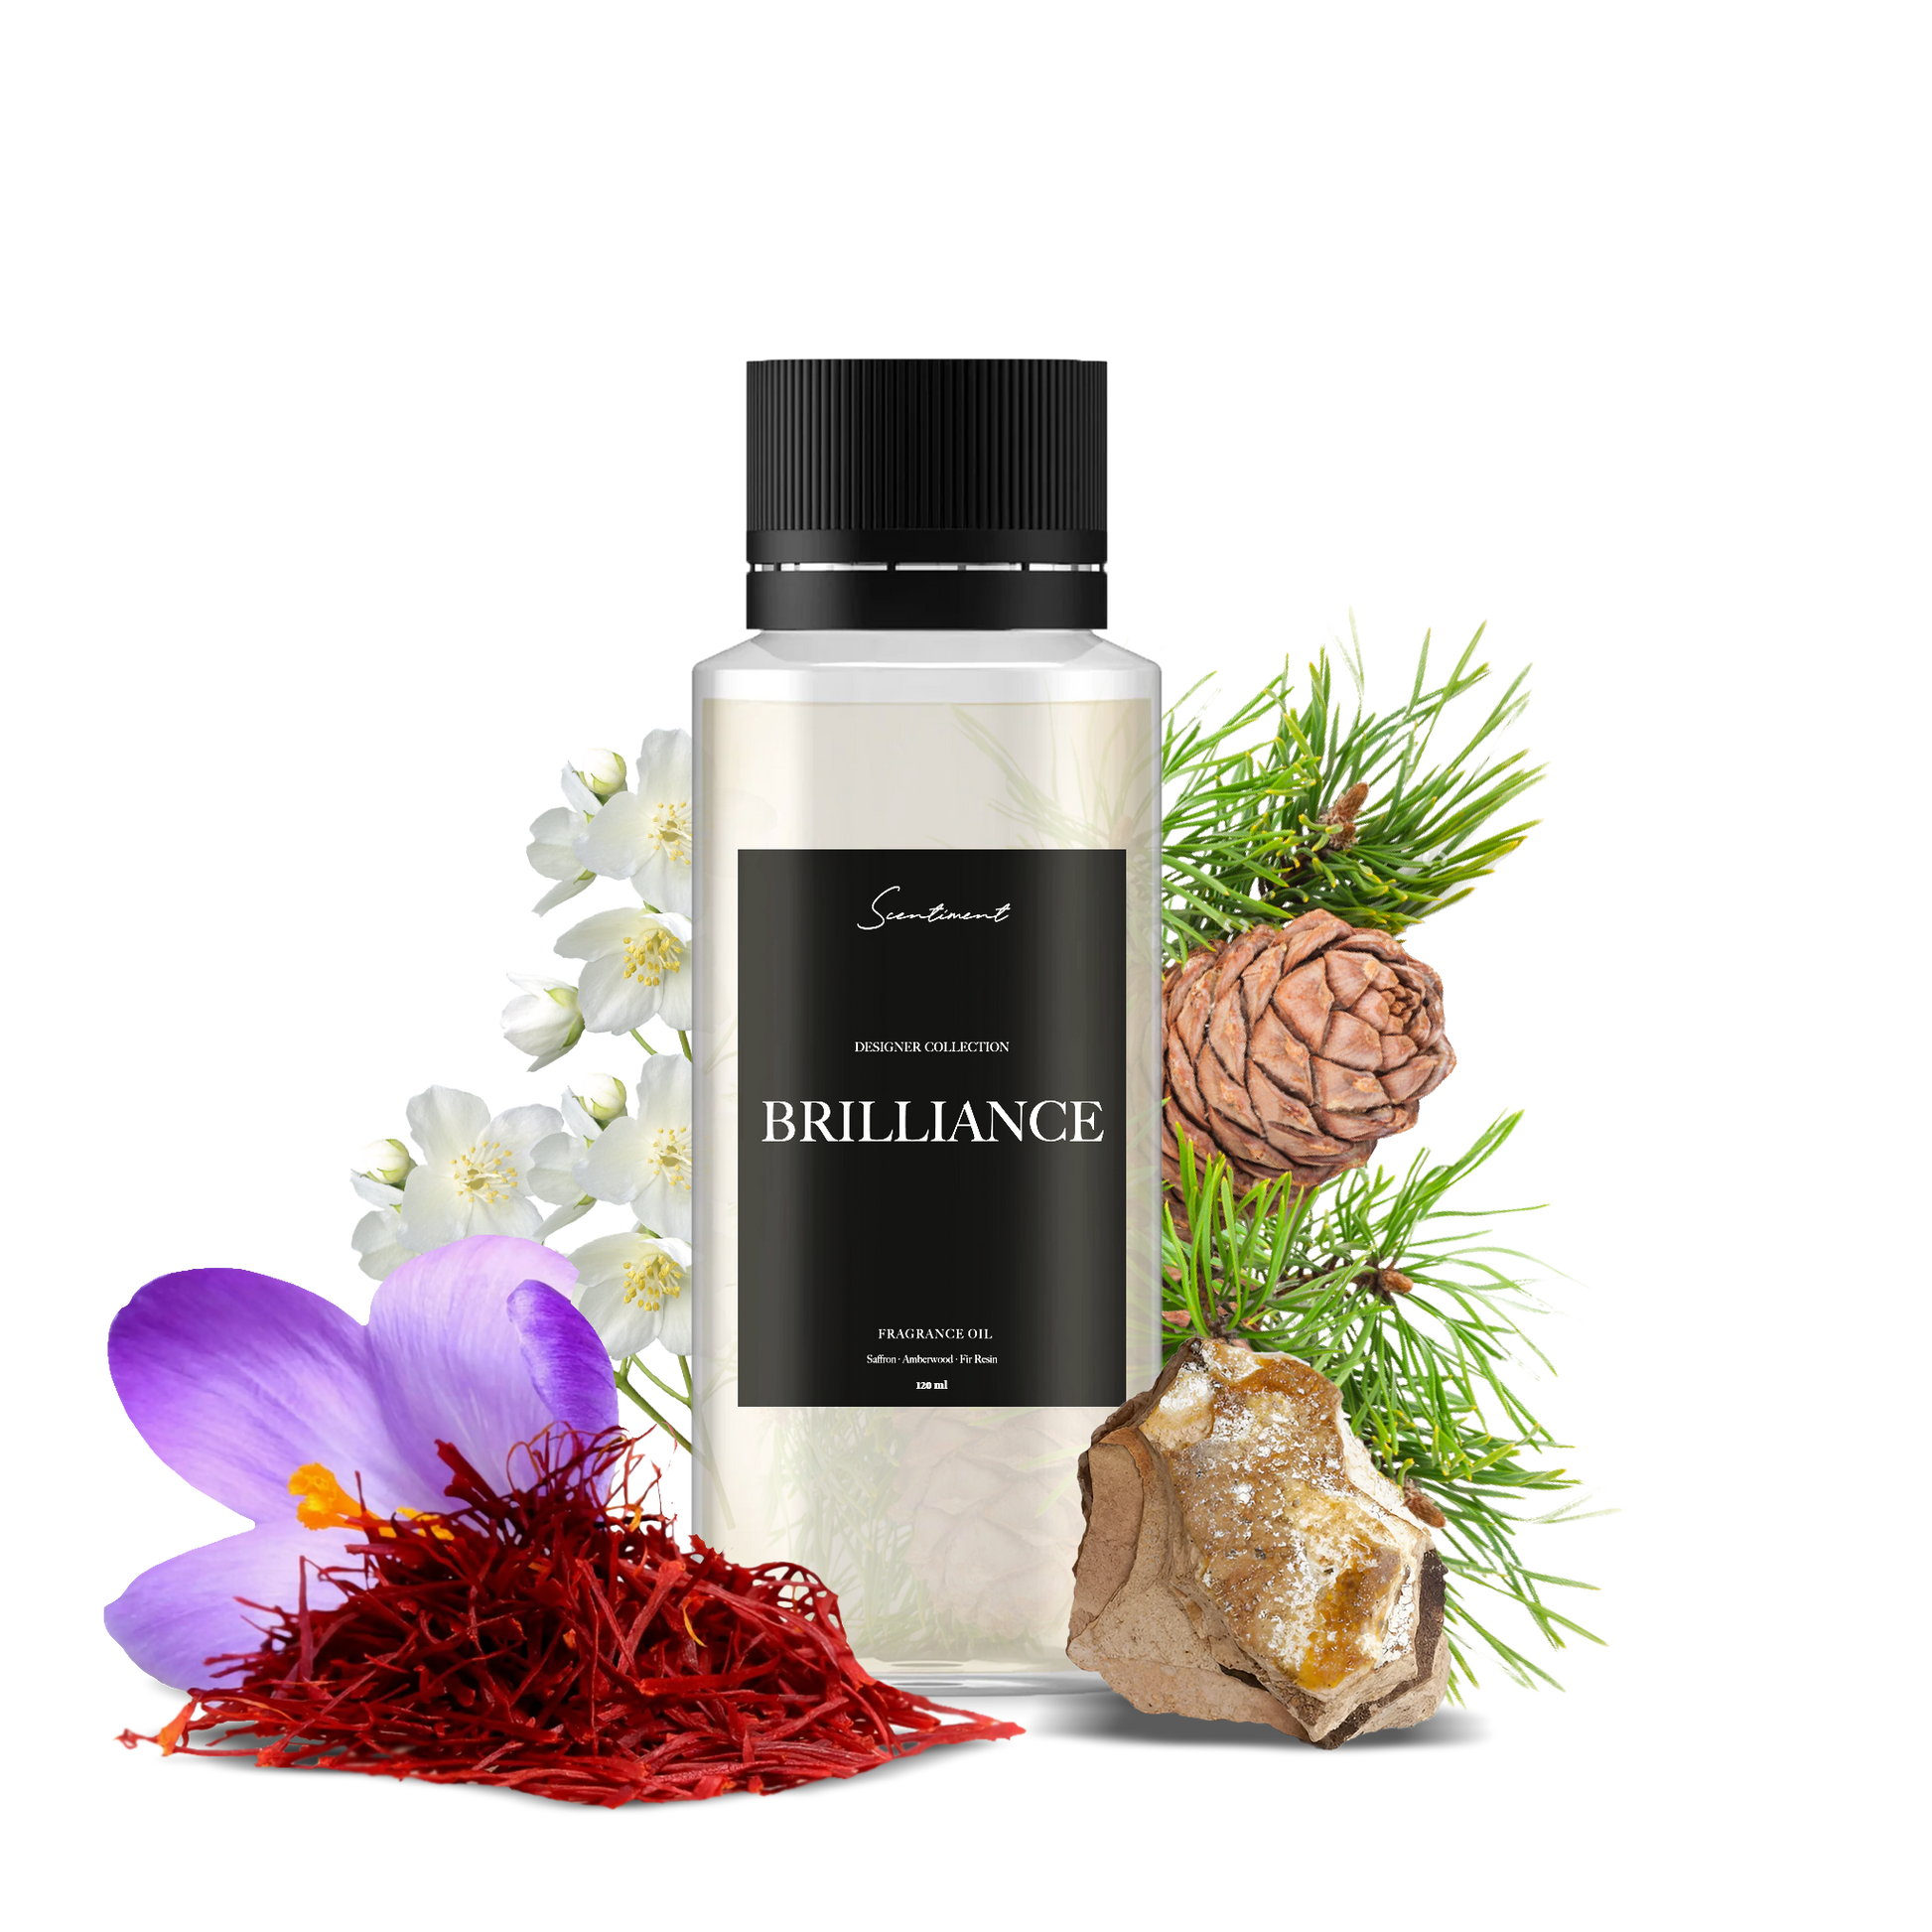 Brilliance Fragrance Oil, inspired by Baccarat Rouge 540® with notes of Saffron, Amberwood, and Fir Resin.